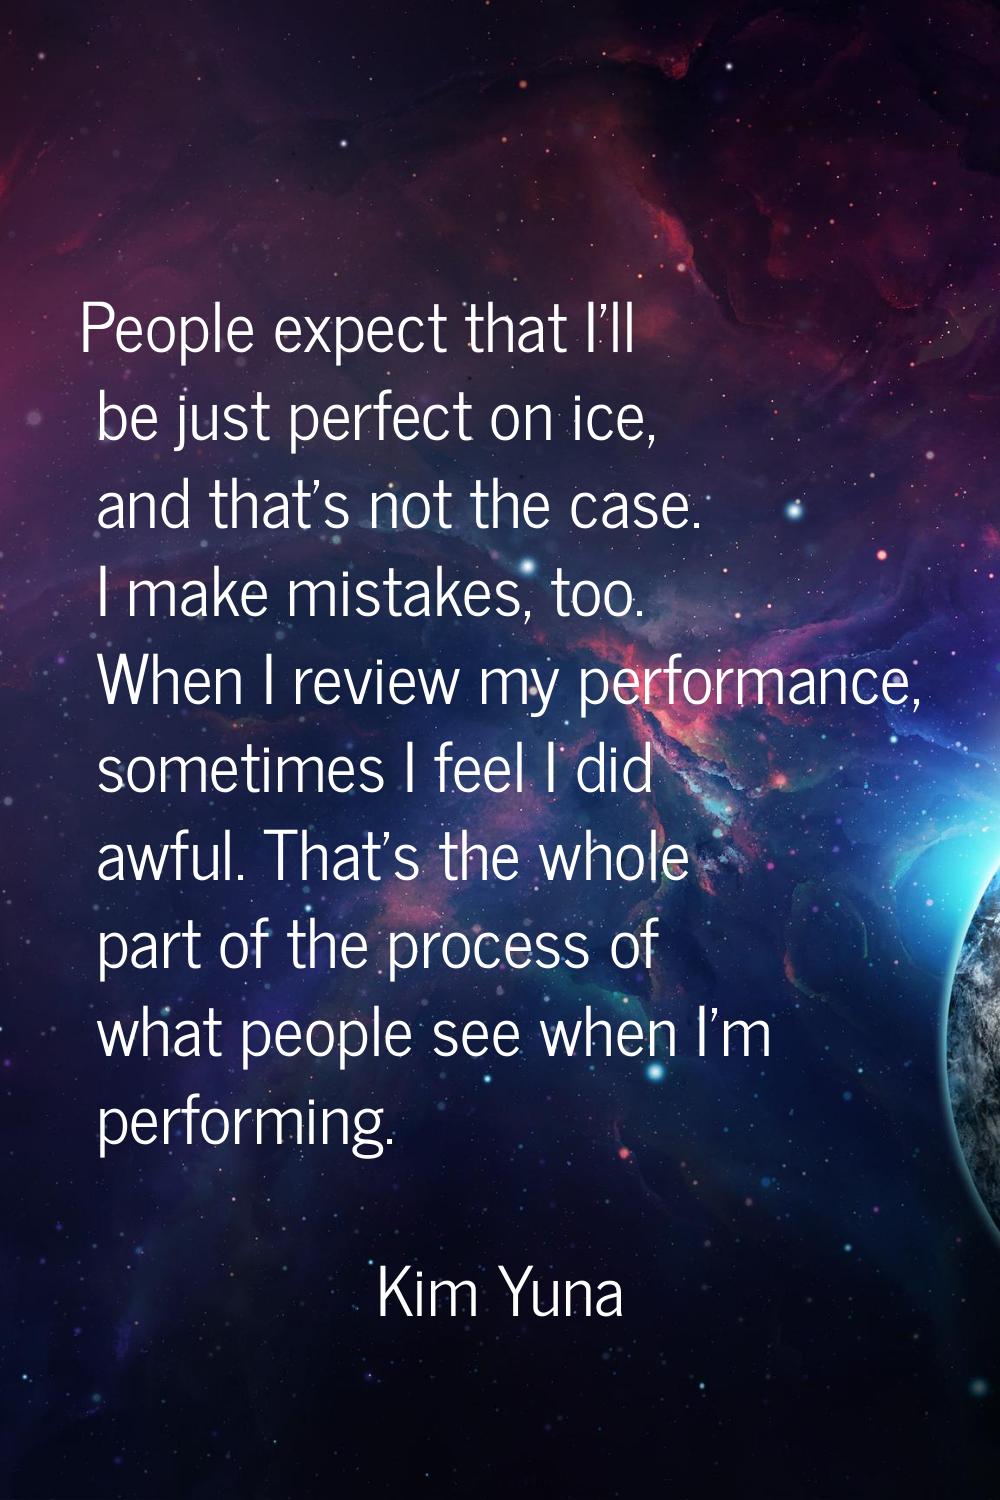 People expect that I'll be just perfect on ice, and that's not the case. I make mistakes, too. When